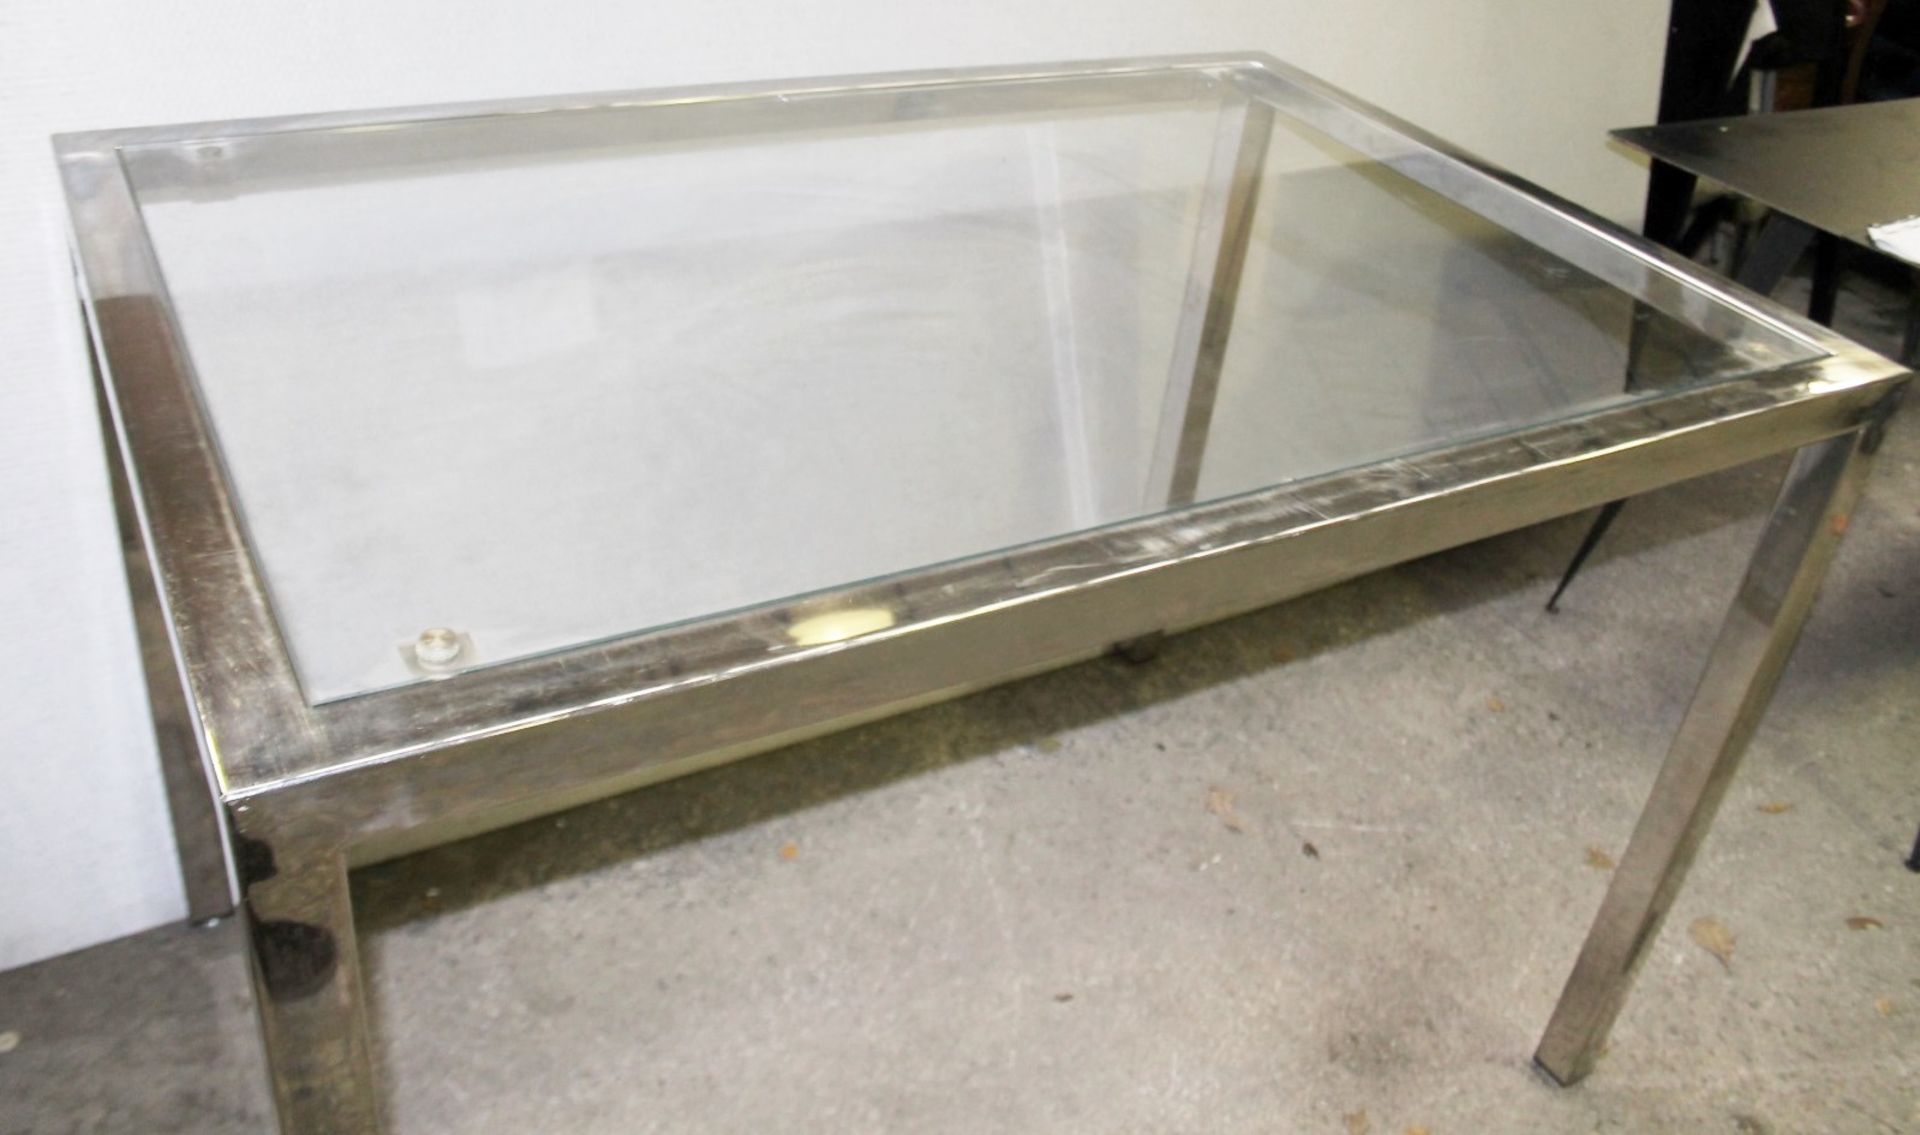 1 x Large Display Table In Glass And Chrome - Dimensions: H91 x W135 x D90cm - Ex-Showroom Piece - - Image 3 of 6